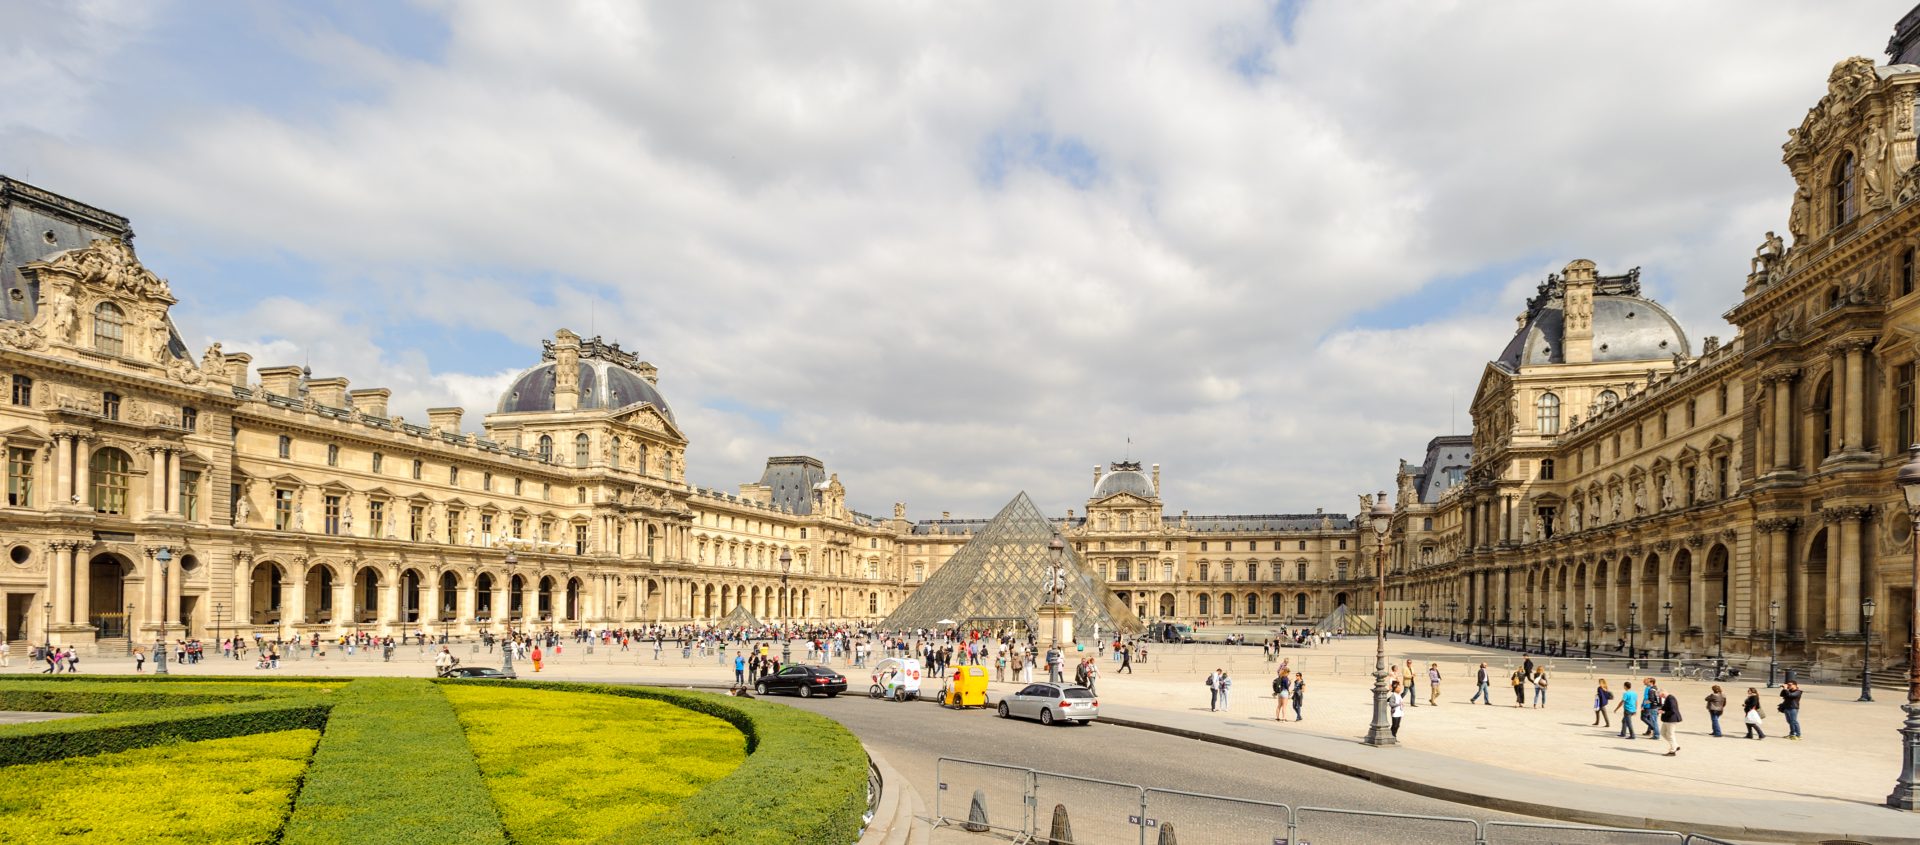 PARIS-FRANCE-JUN-17-2014_-Louvre-Museum-one-of-the-largest-museums-in-the-world.-It-has-more-than-35000-objects-and-its-one-of-the-most-visited-places-in-Paris-France.jpg